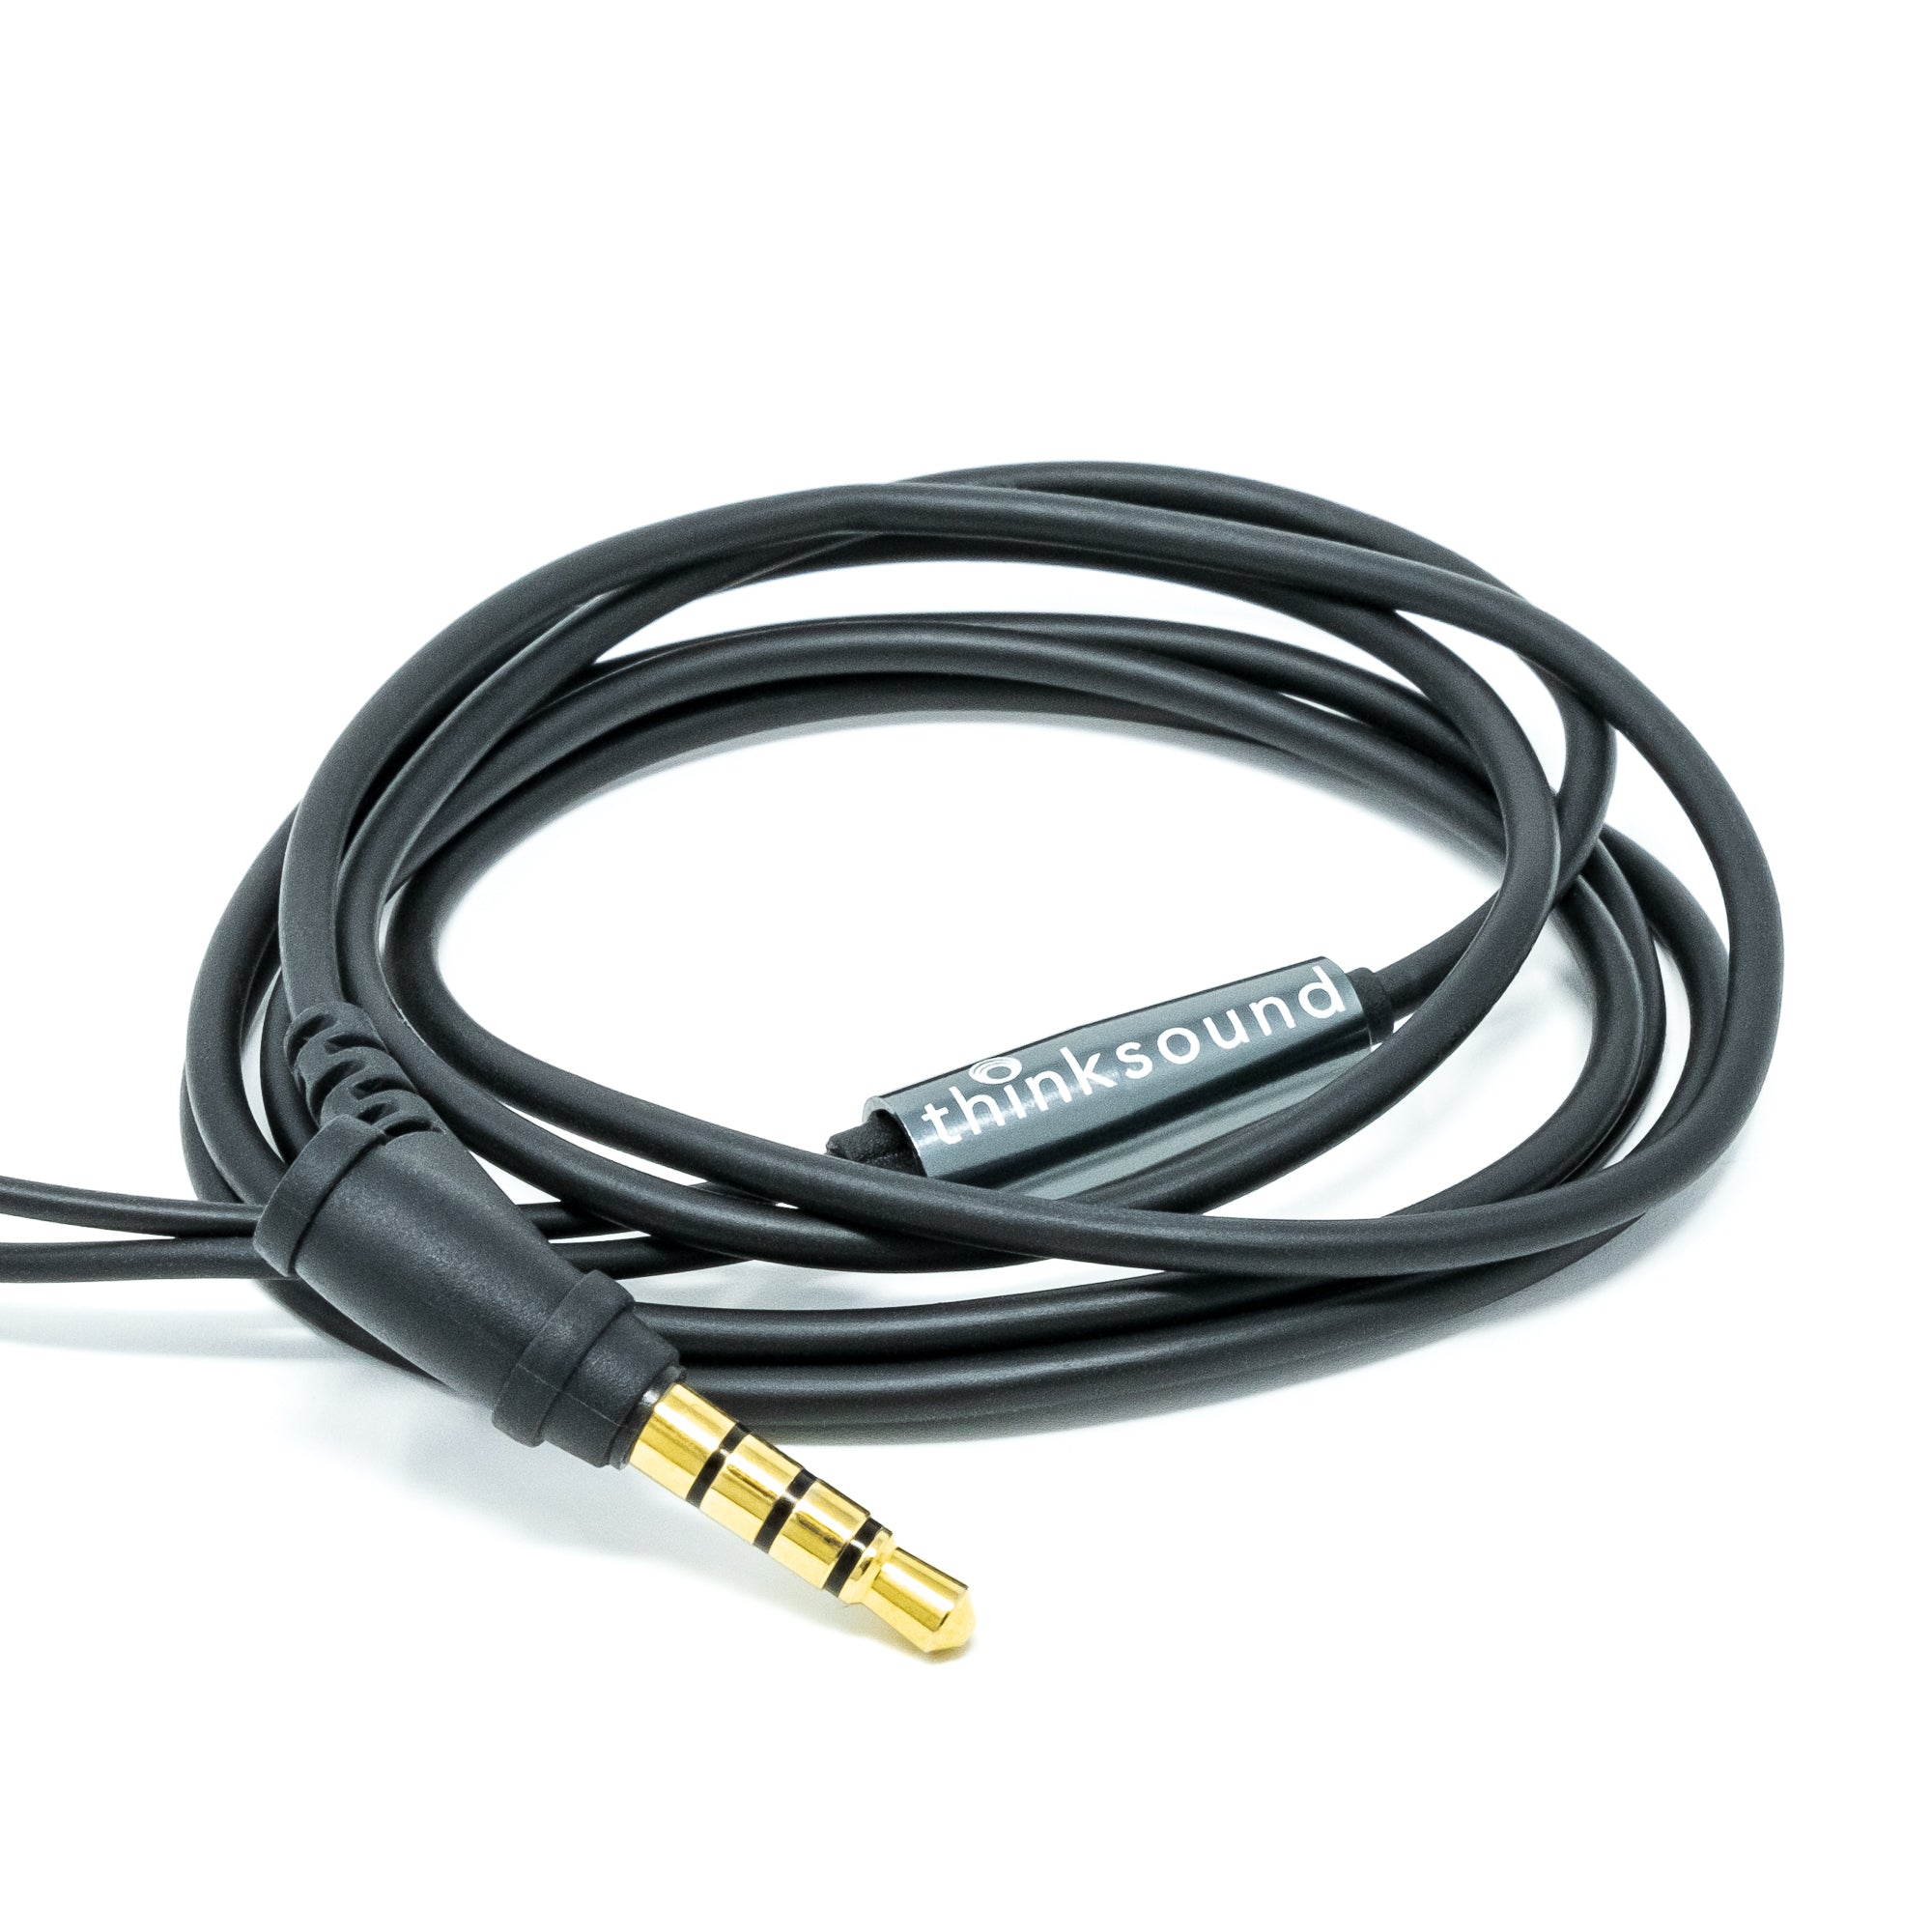 thinksound in20 headphones tangle free cable